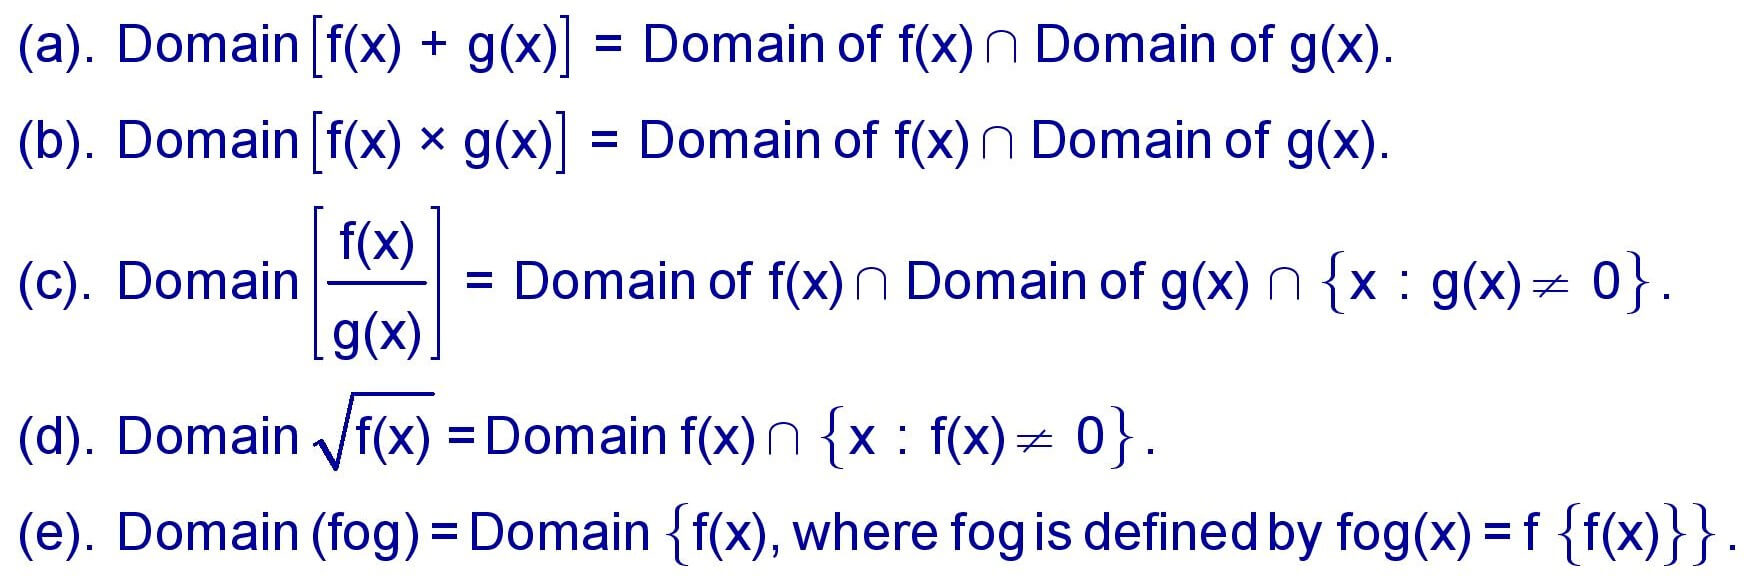 Formula for the Domain of a function